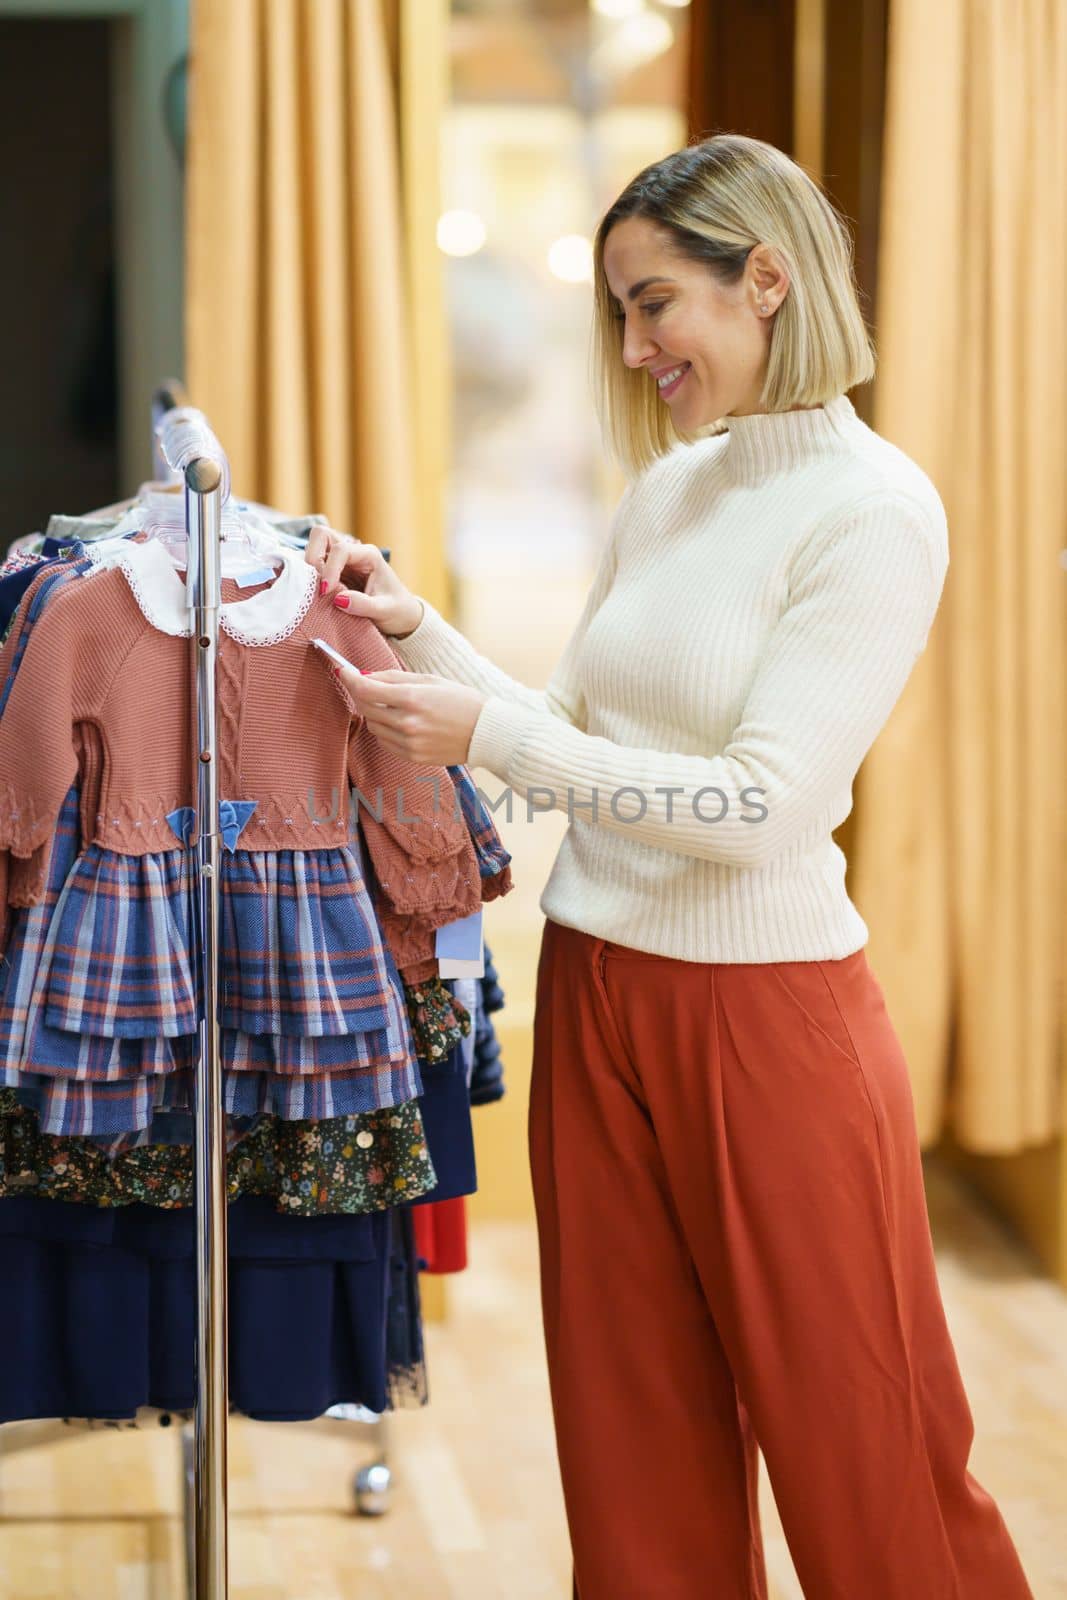 Smiling female customer looking at price of clothes hanging on rail in child store during shopping in mall